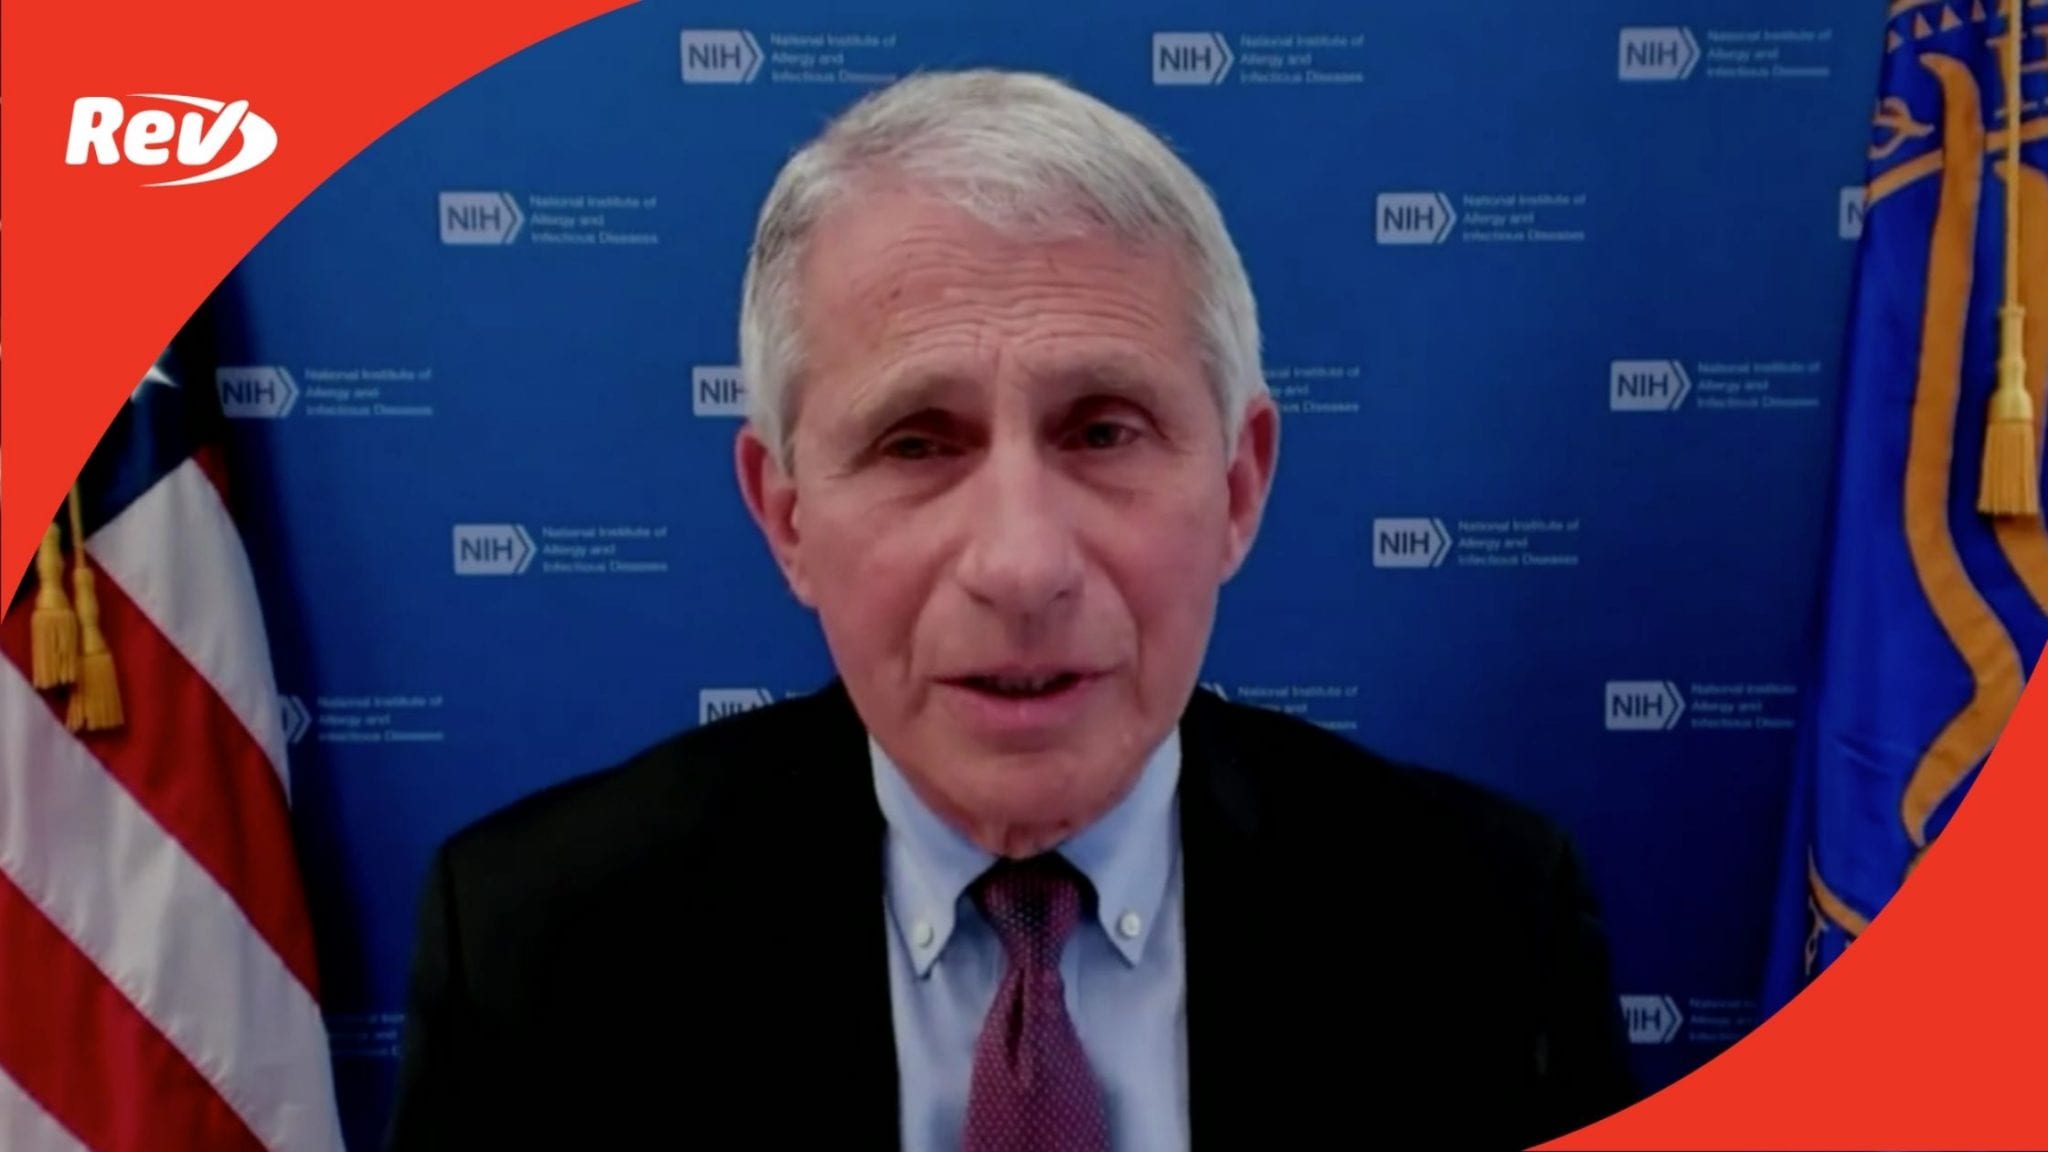 White House COVID-19 Task Force, Dr. Fauci Press Conference Transcript October 22